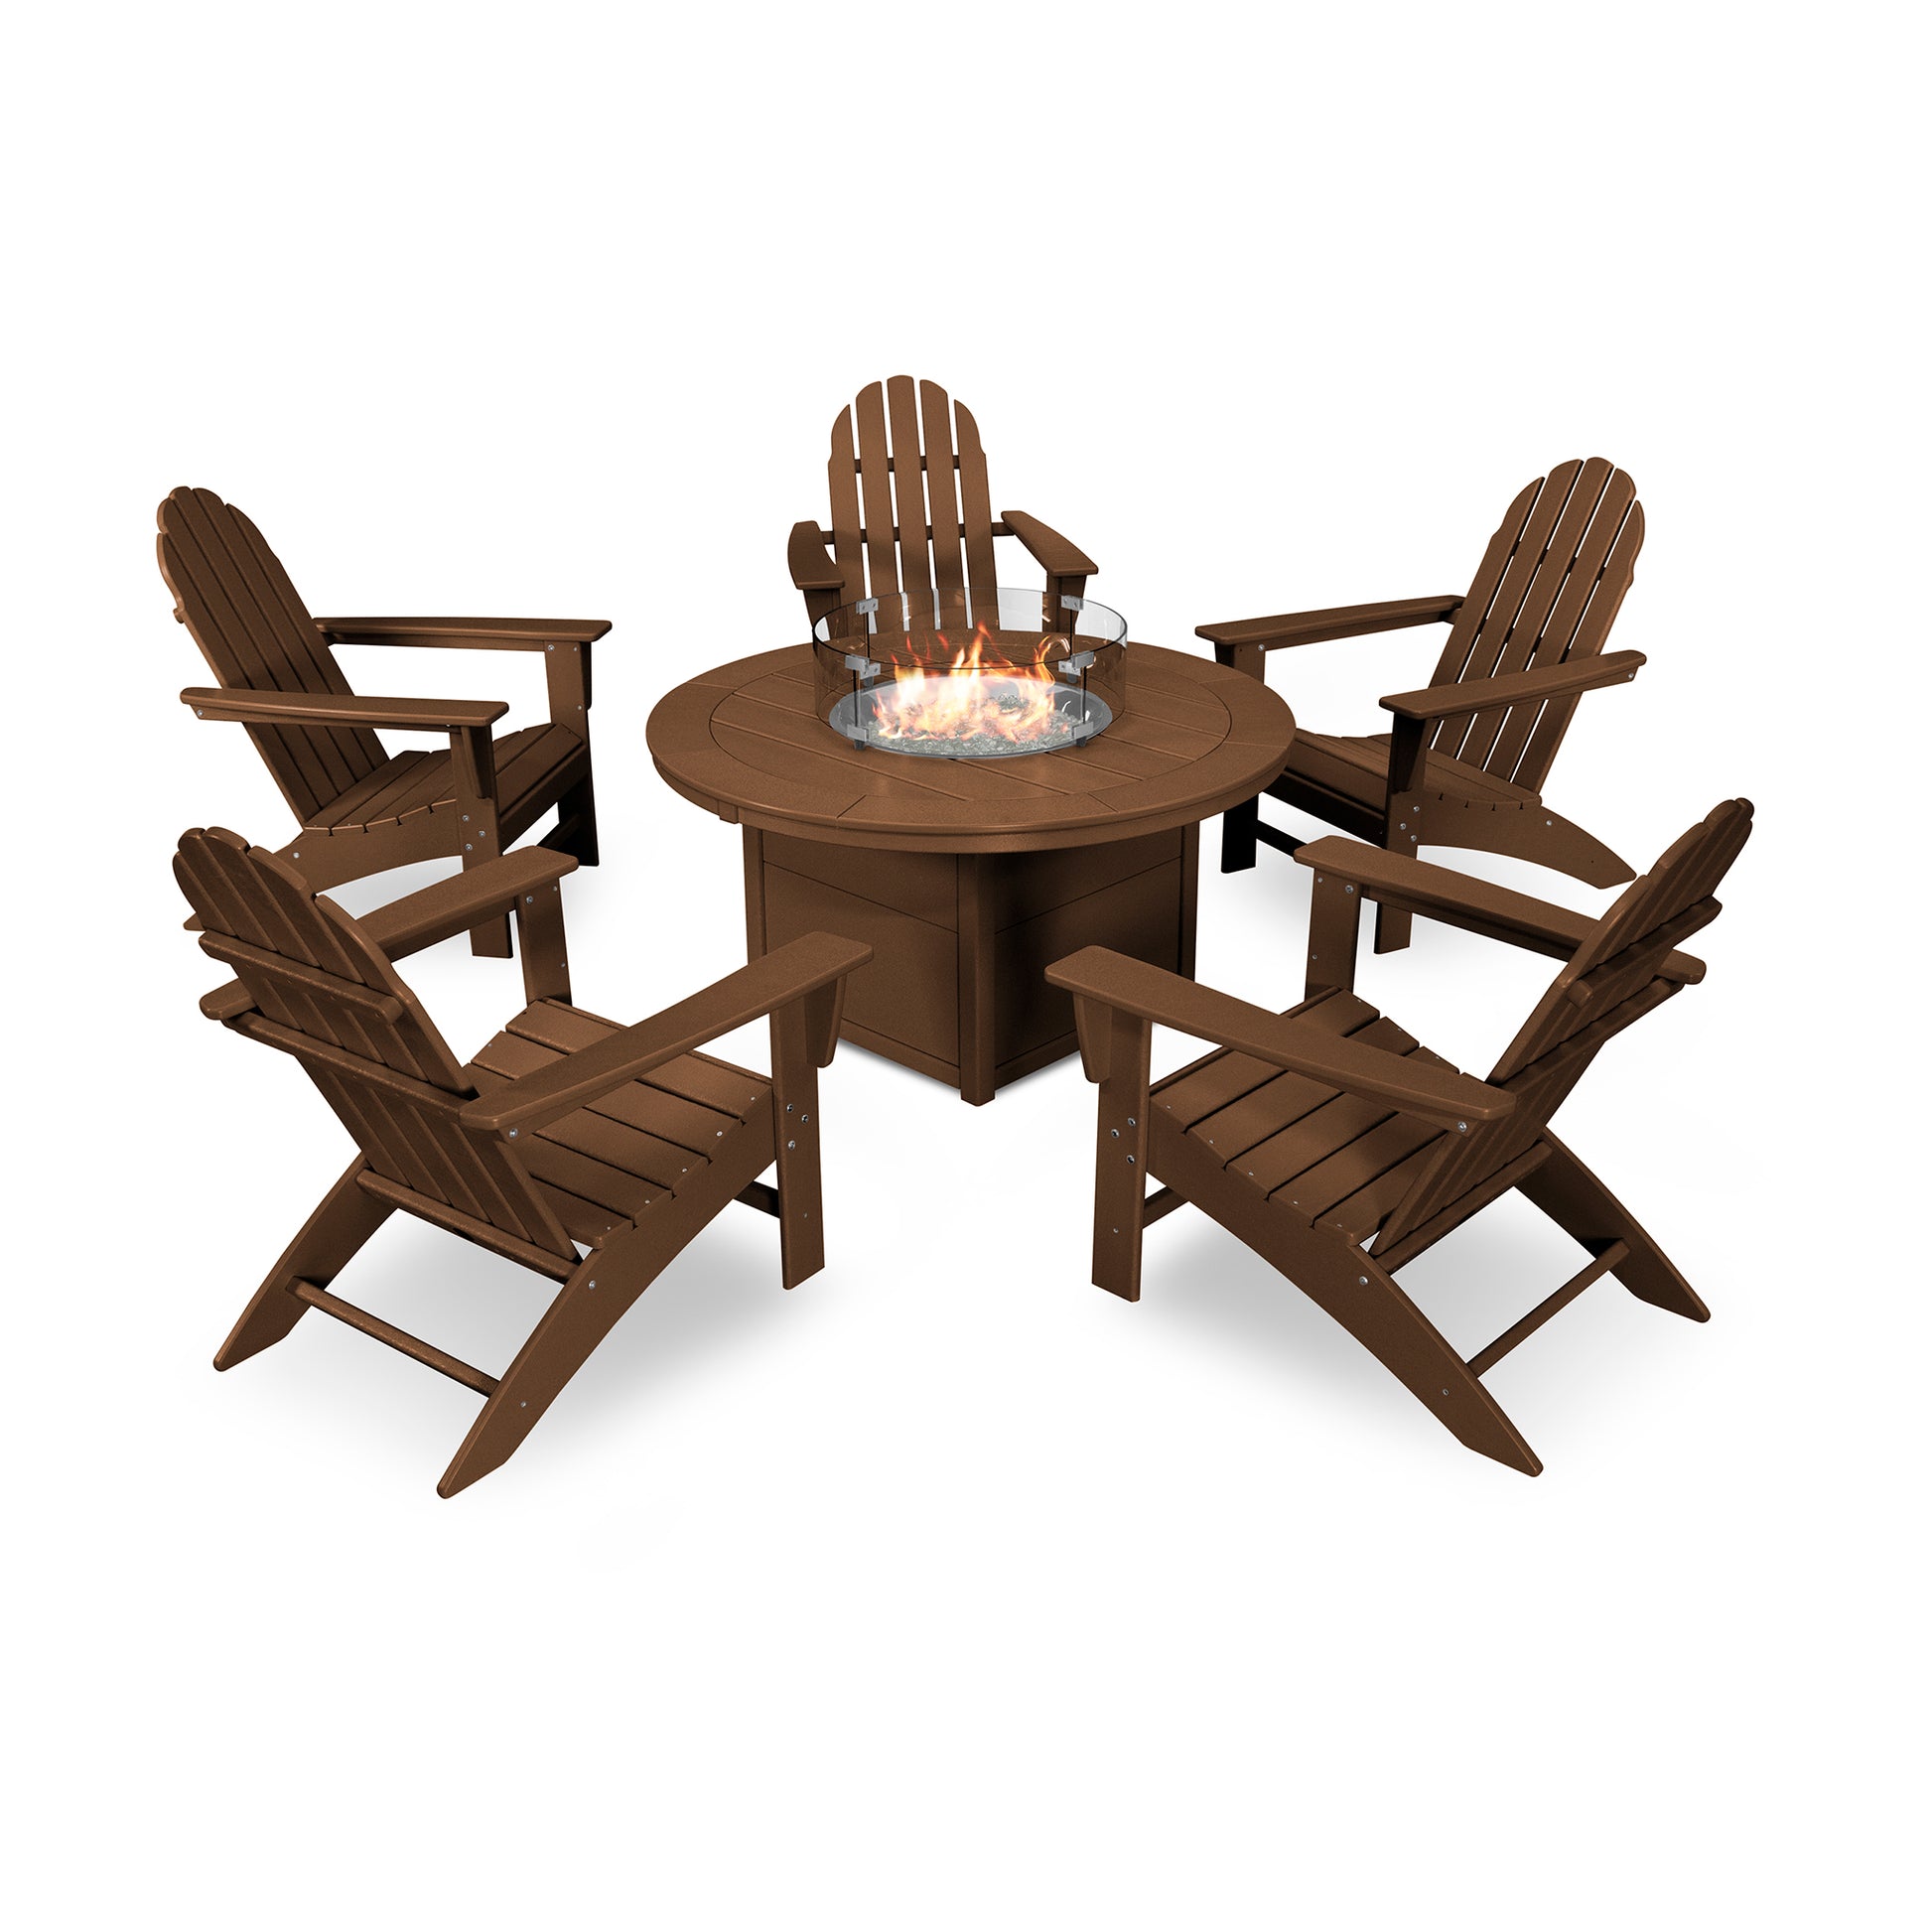 A POLYWOOD Vineyard Adirondack 6-Piece Chat Set with Fire Pit Table featuring four Vineyard Adirondack chairs around a circular table with a built-in fire pit, all in a matching dark brown color, isolated on a white background.